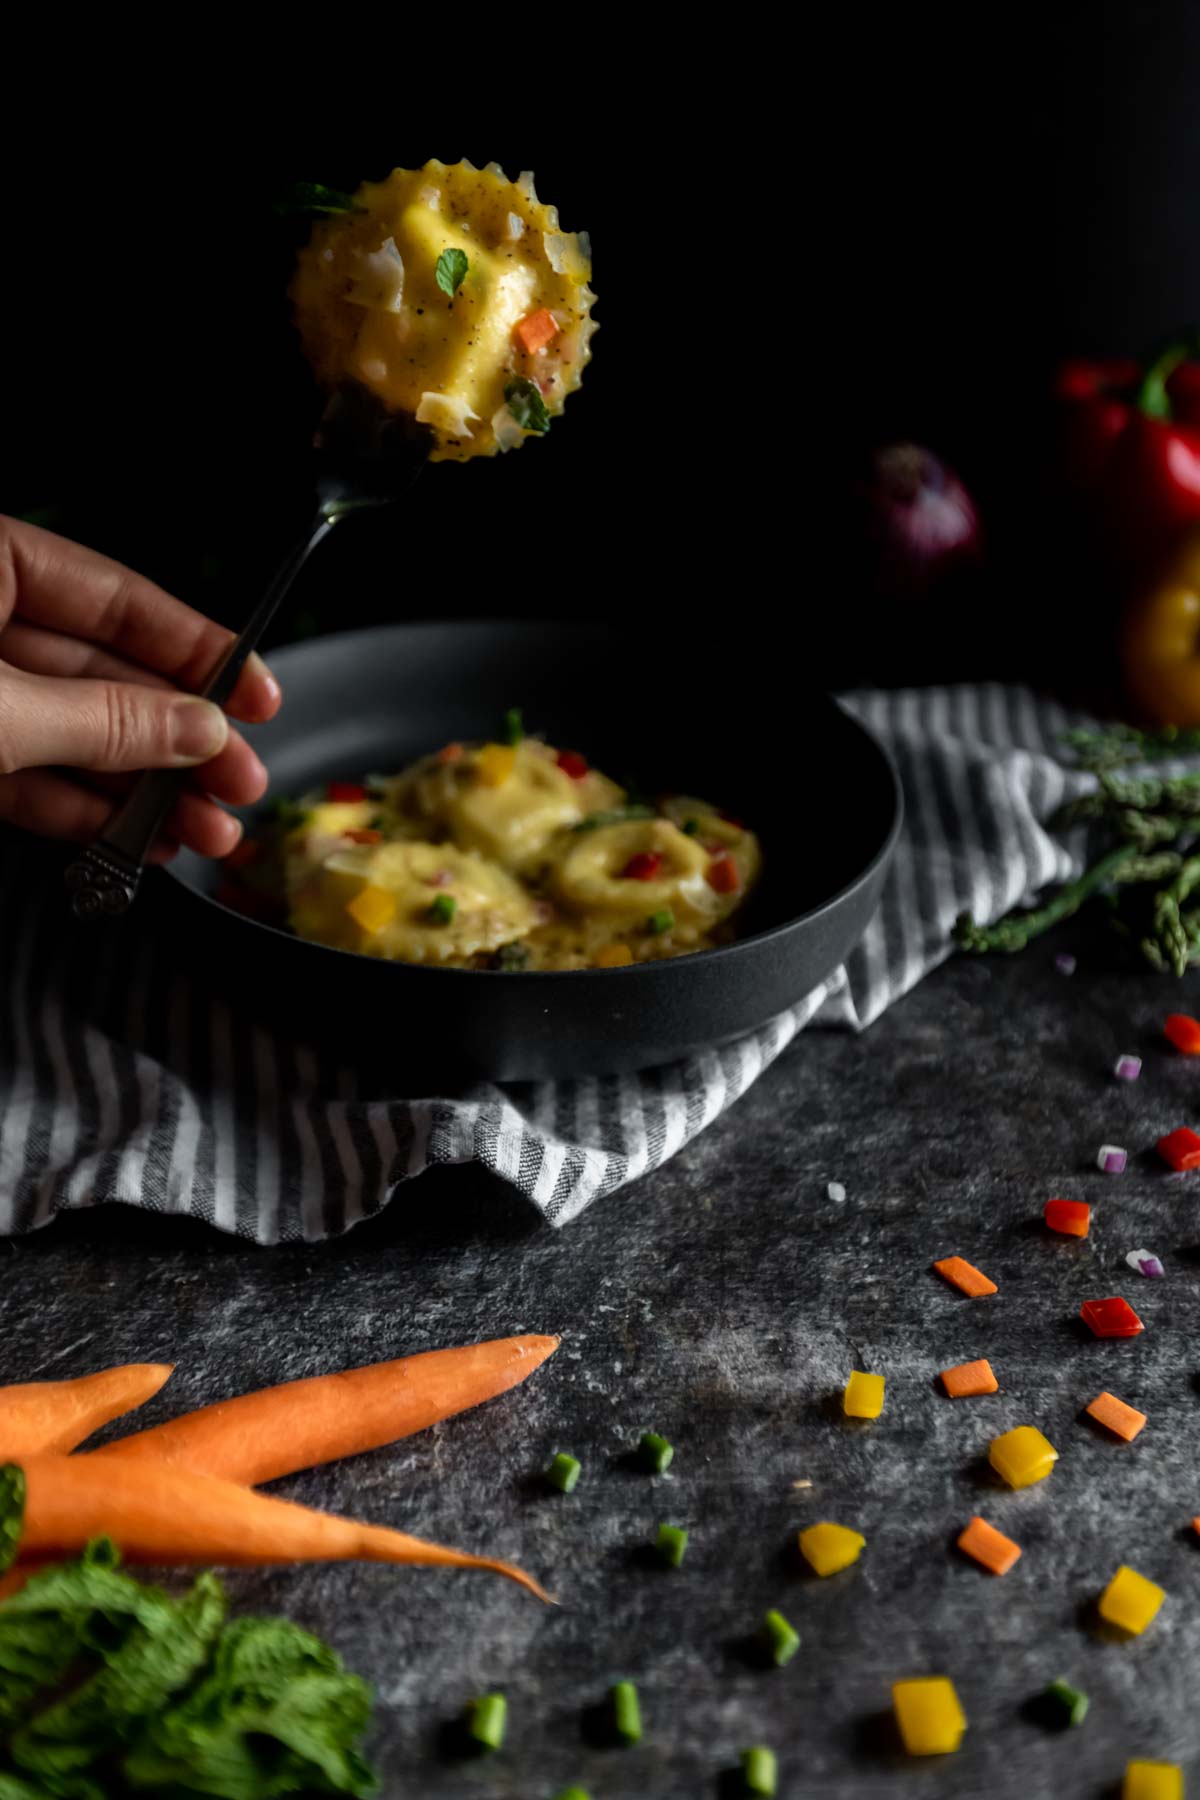 A whole ravioli on a fork surrounded by “confetti” vegetables